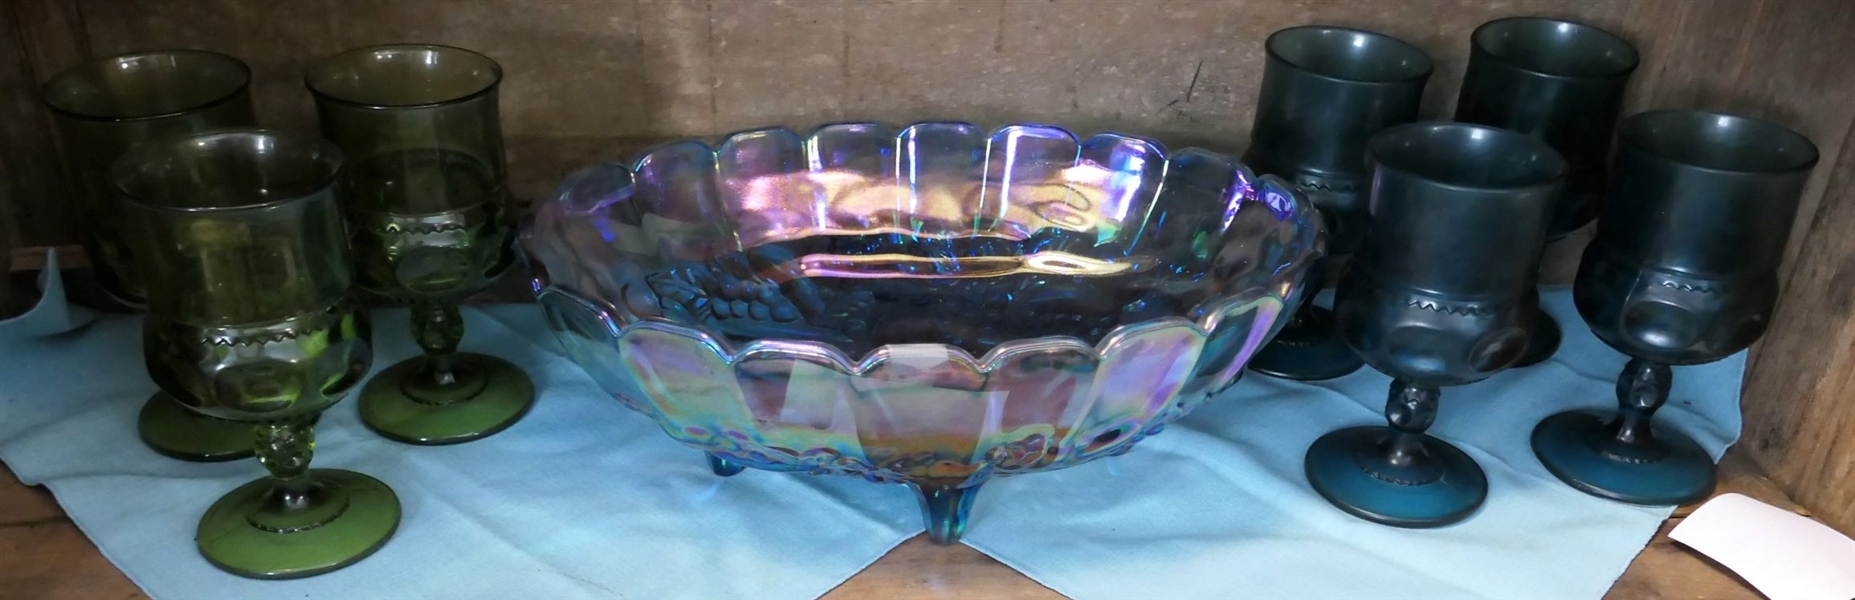 Oval Blue Iridized Footed Bowl 12" Across, 4 Blue Kings Crown Glasses, and 3 Olive Green Kings Crown 